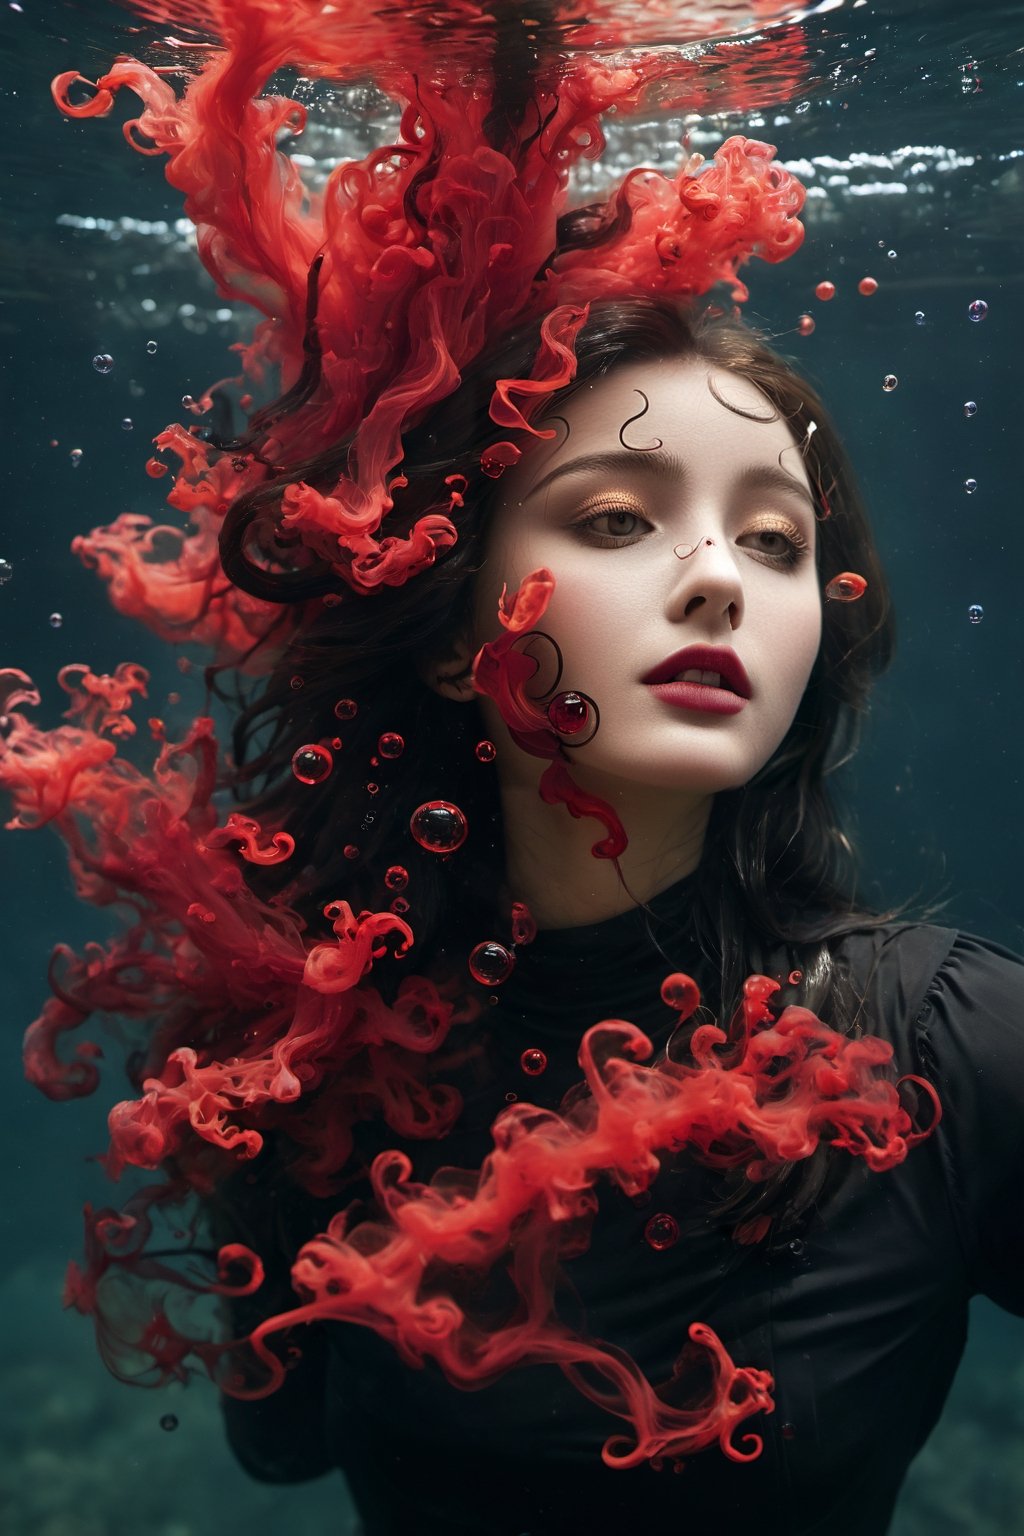 a portrait of a women submerged, with streams of red and black ink swirling around them, resembling billowing smoke underwater. The play of light creates a stark contrast, highlighting the serene expression on the face amidst the chaos of colors, with bubbles scattered across the view, suggesting a silent, slow-motion explosion. The light refracts through the water, adding depth and a dreamlike quality to the scene, focusing on the interplay between the inky tendrils and the illuminated bubbles., Precipitate girl, sexy pose